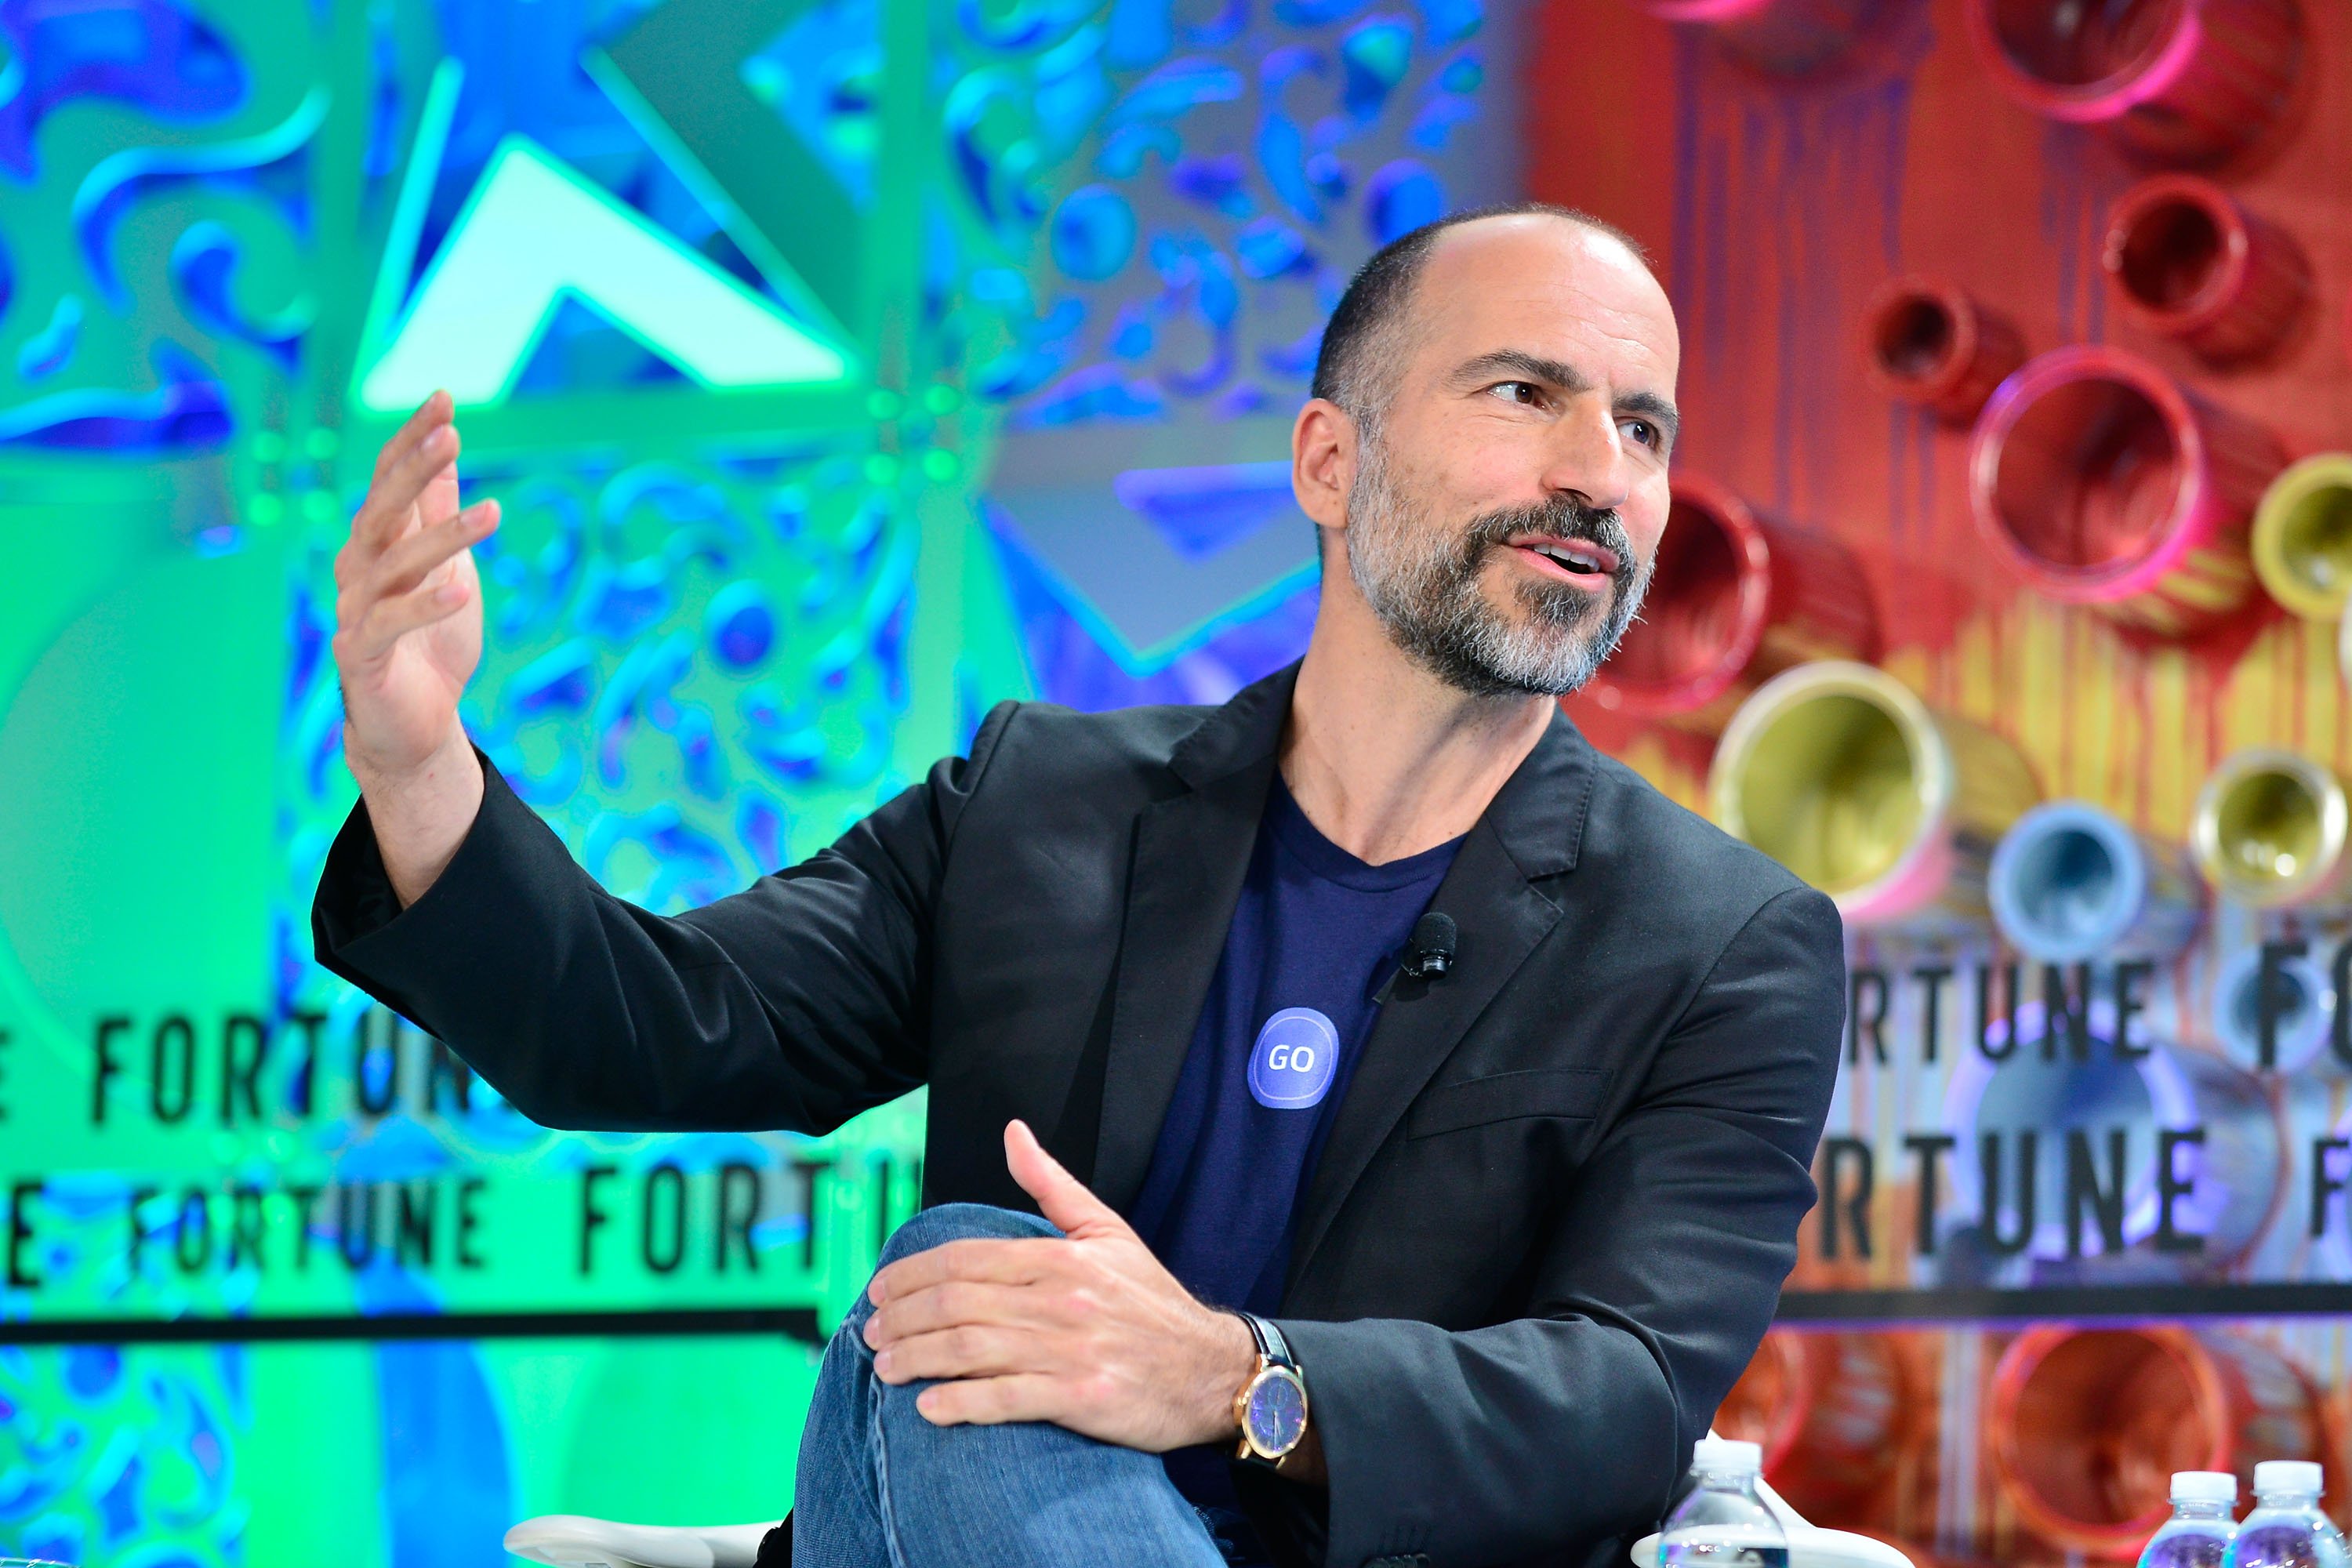 Uber CEO Dara Khosrowshahi attends Fortune Most Powerful Women Summit 2018 at Ritz Carlton Hotel on October 3, 2018 in Laguna Niguel, California. (Photo by Jerod Harris/Getty Images for Fortune)